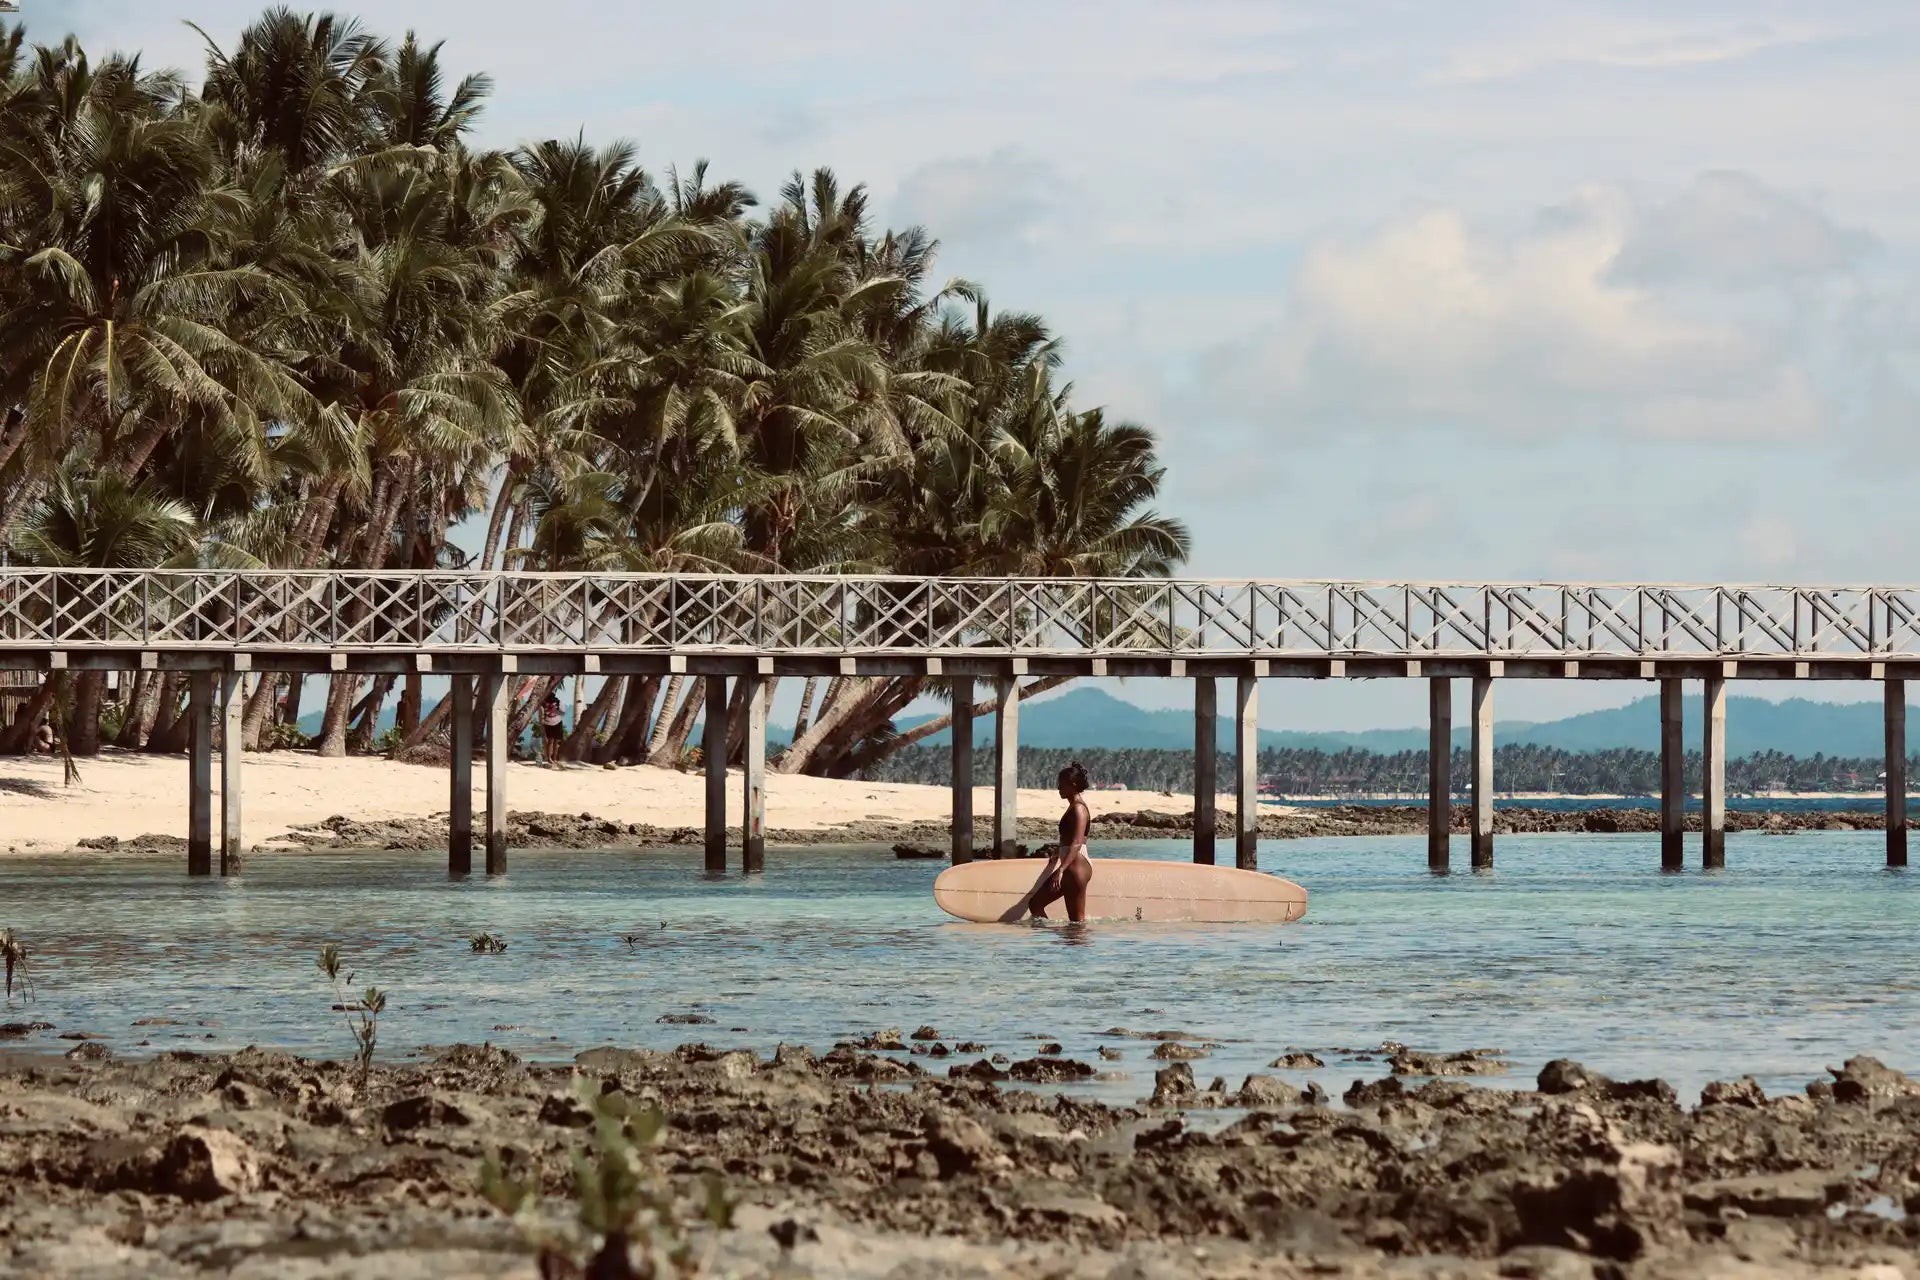 A woman standing in the water with a surfboard near a pier in the Philippines.